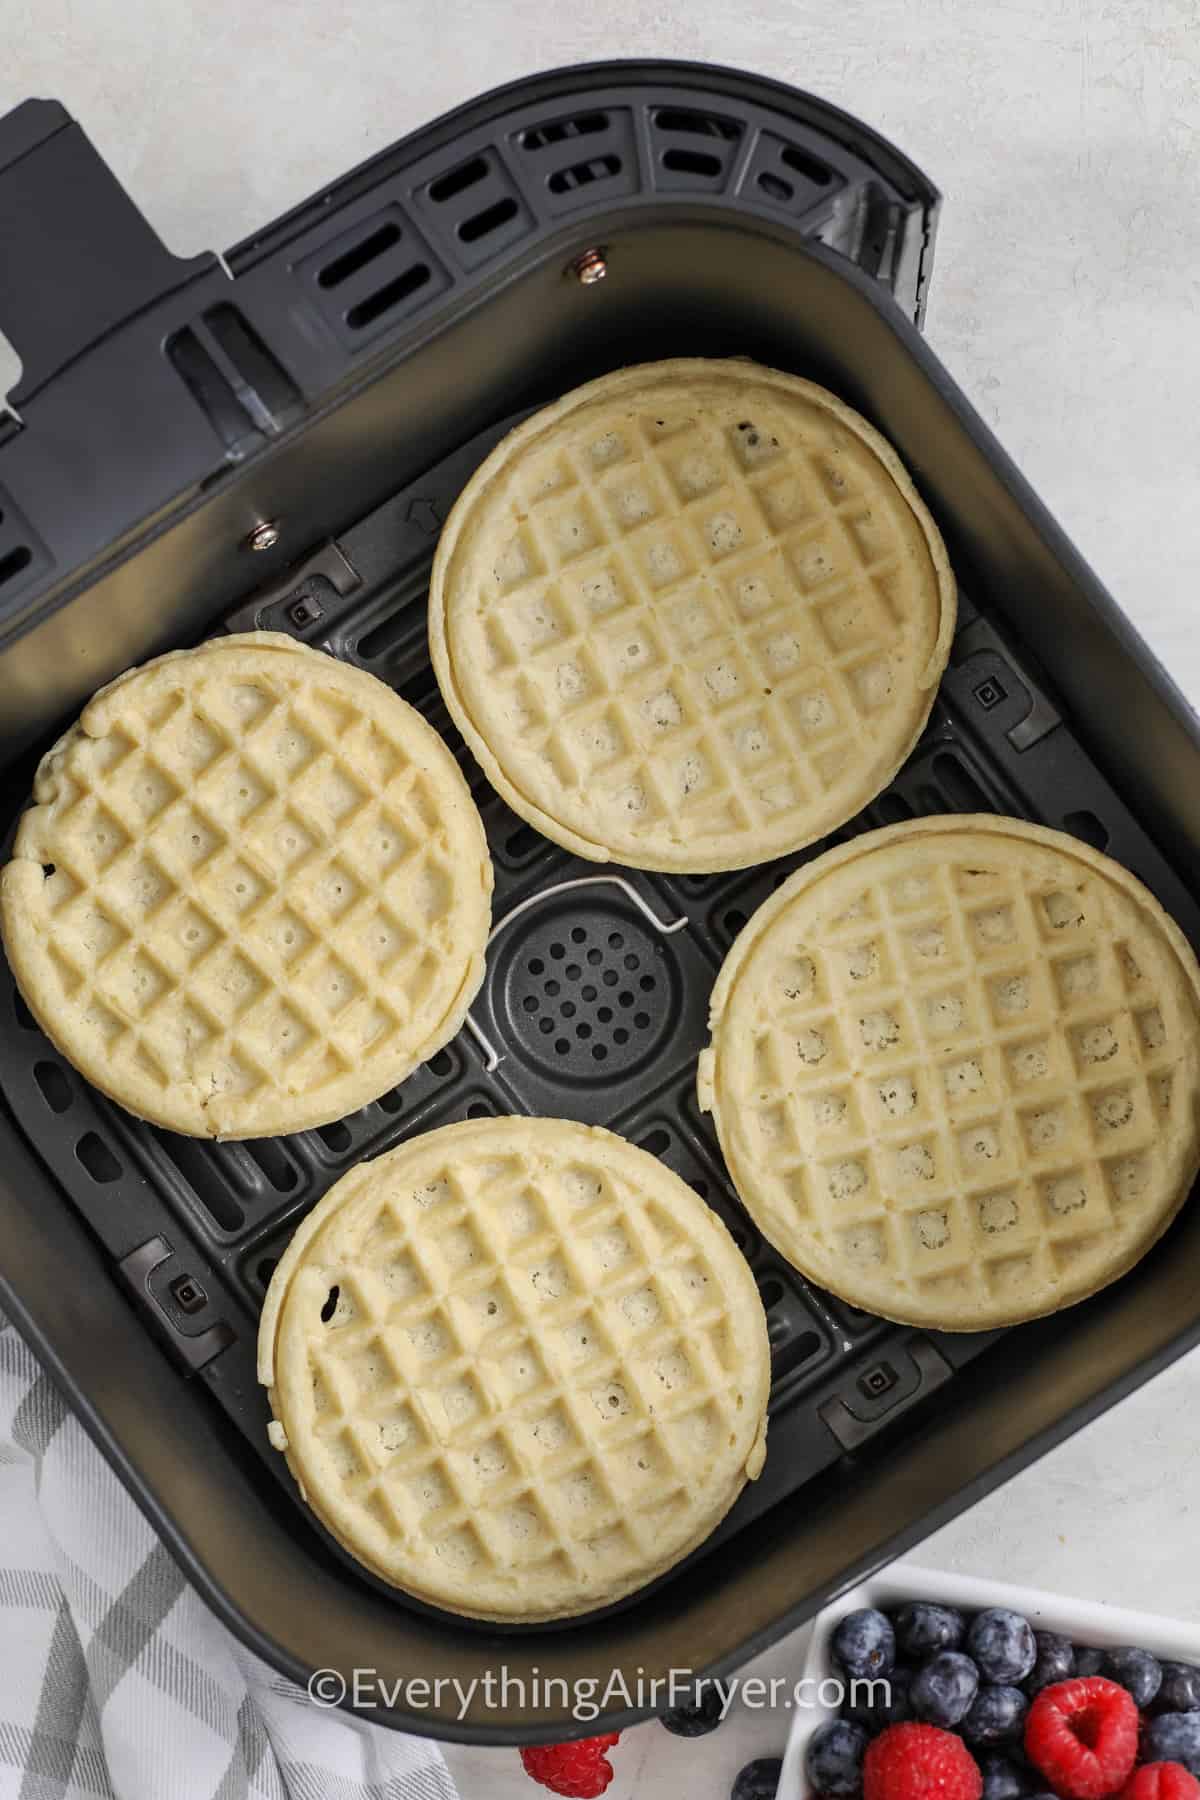 Frozen Waffles in the Air Fryer before cooking